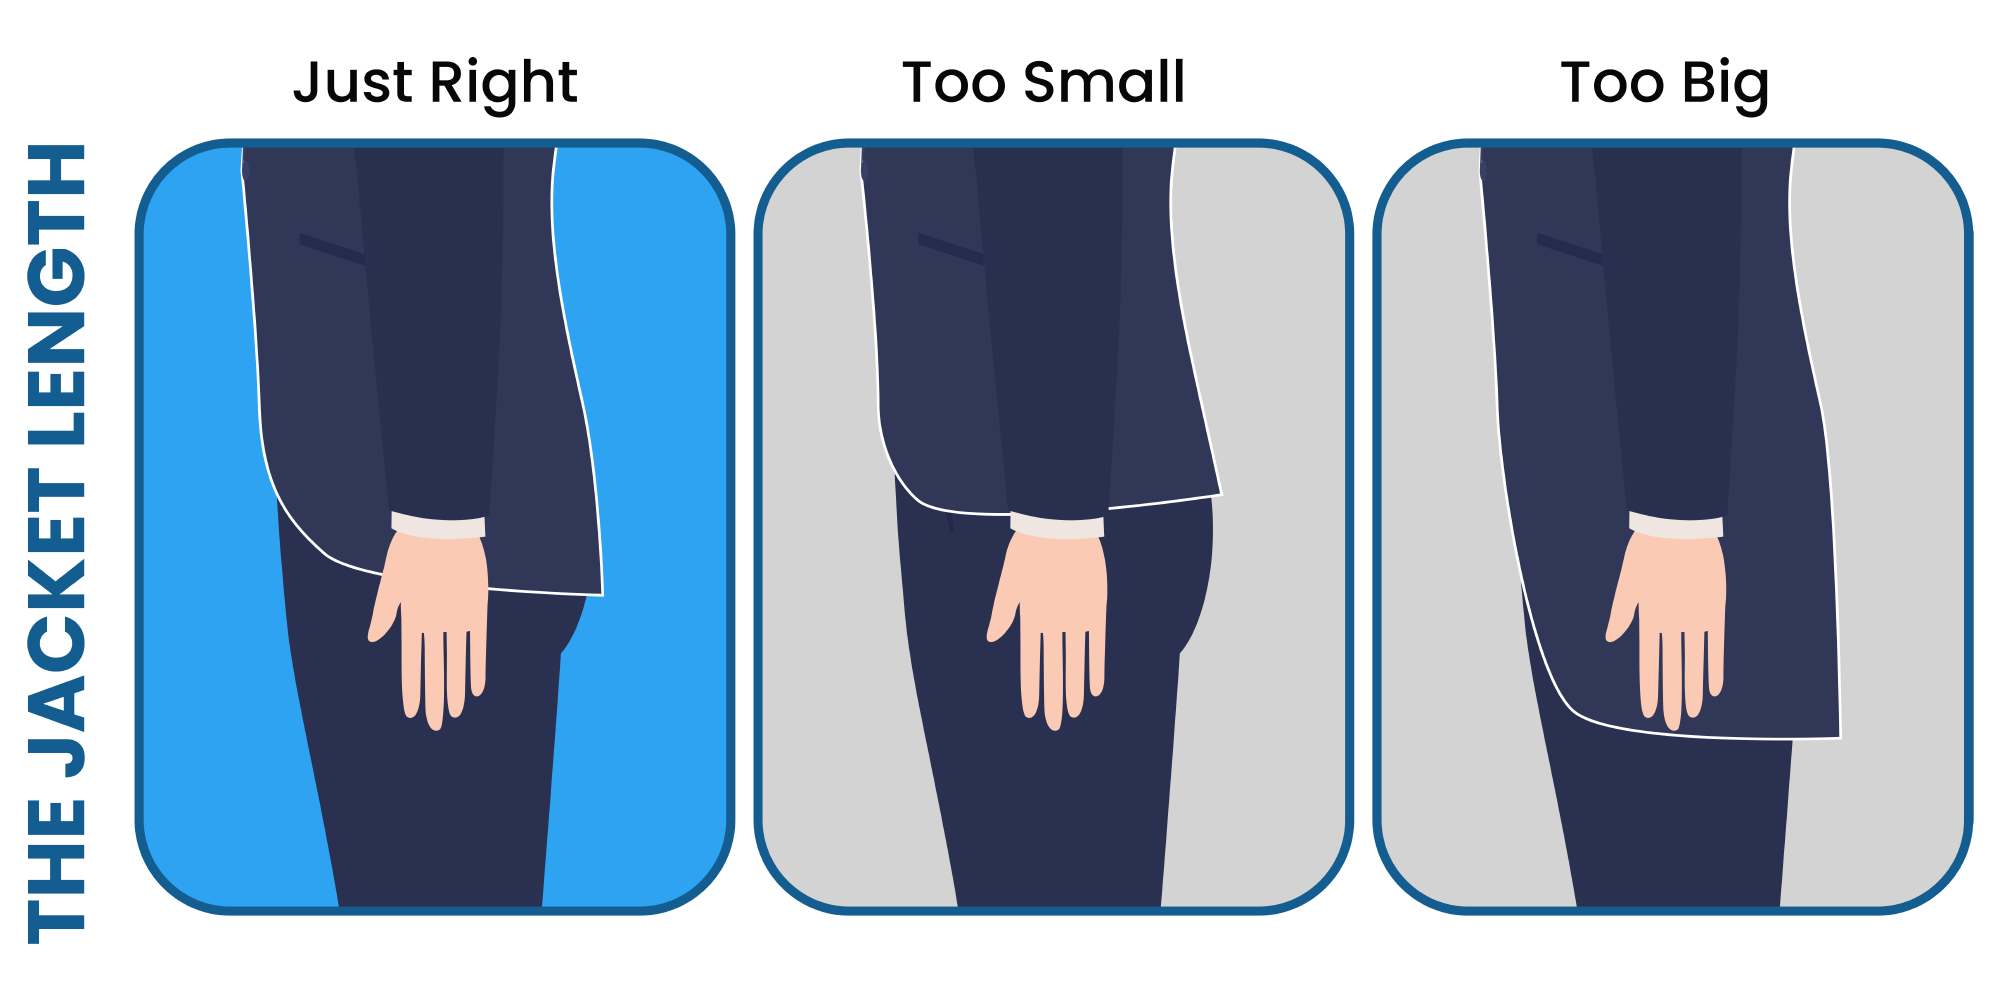 How to Measure for a Suit and Other Clothes (+ 2 Hacks)